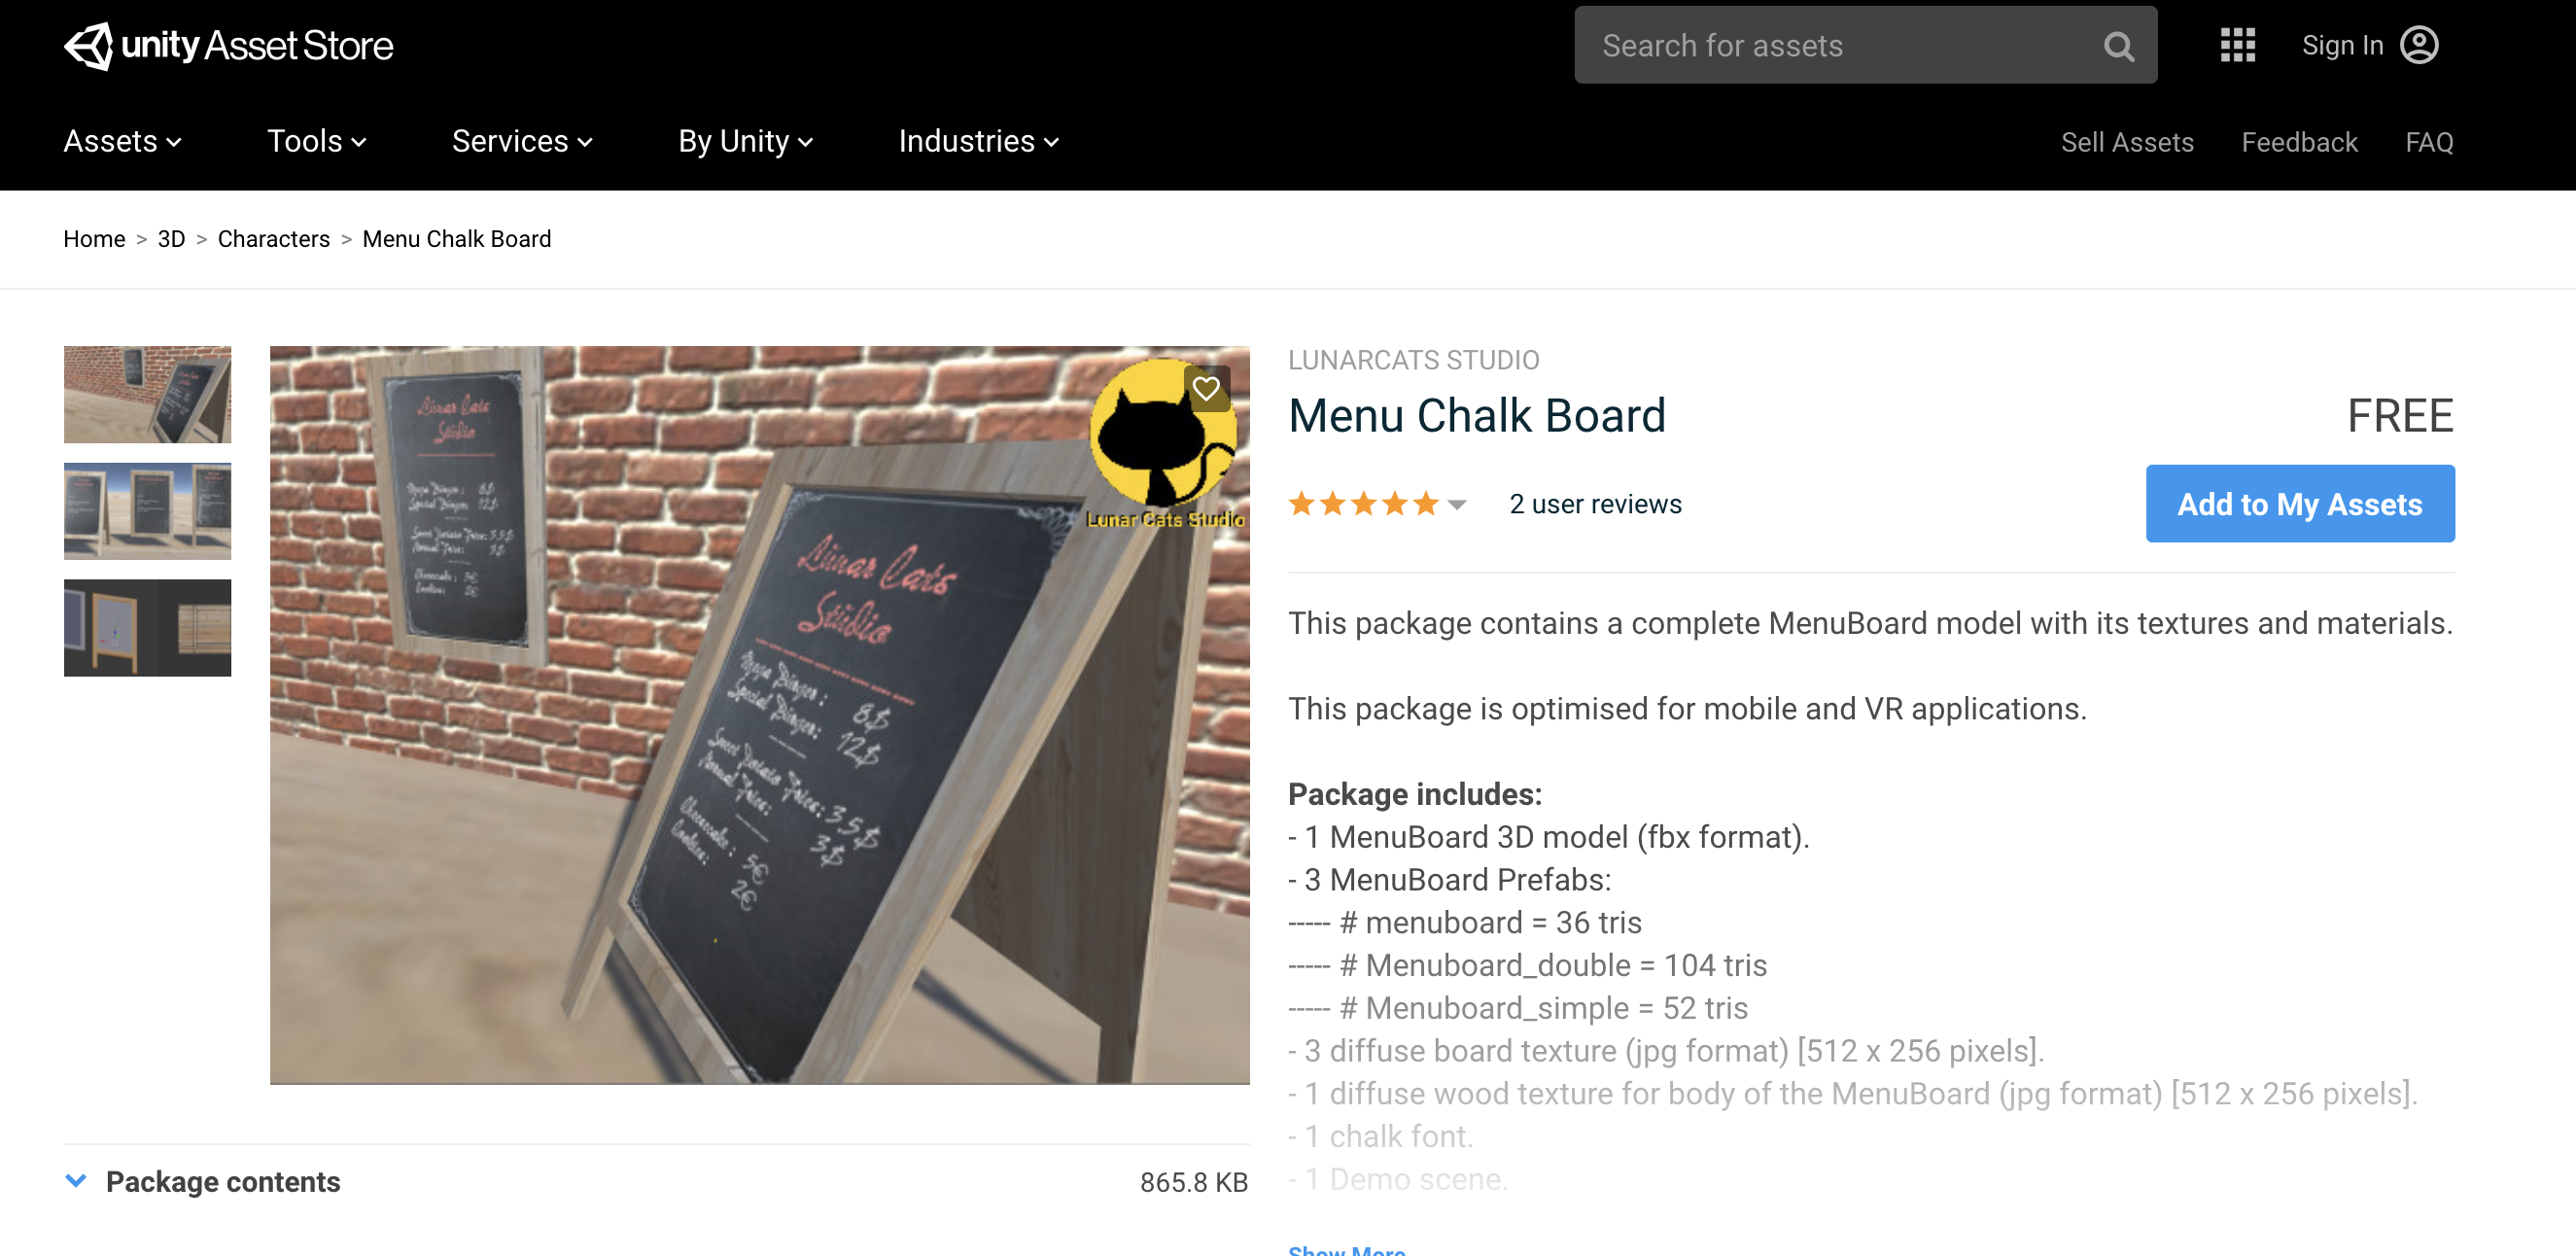 screenshot of the Menu Chalk Board asset found on the Unity Asset Store